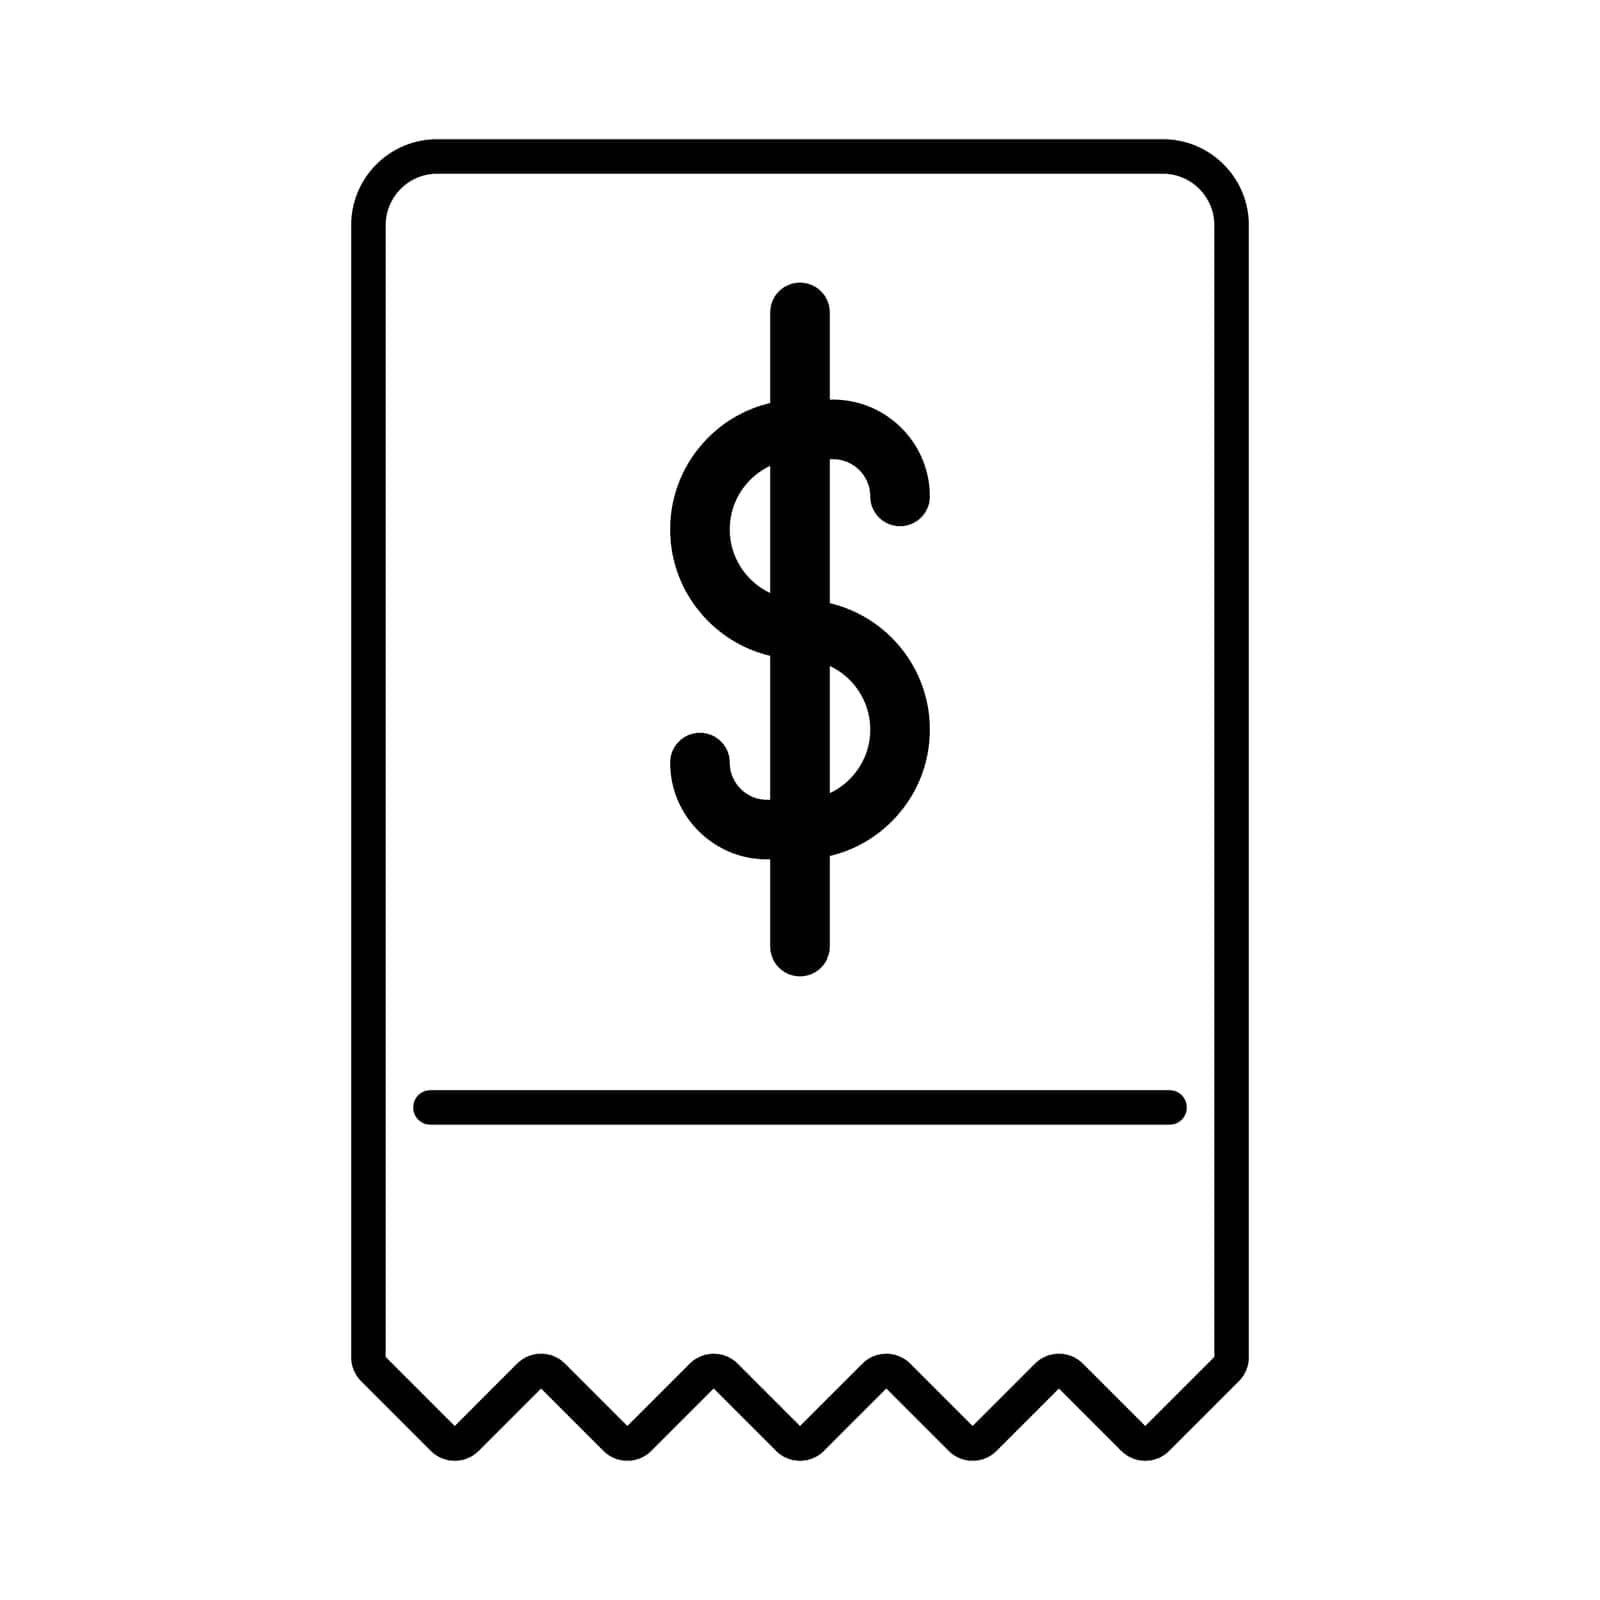 Shopping receipt vector icon. Shopping list icon. A simple stylish shop receipt. Payment confirmation icon. by Moreidea